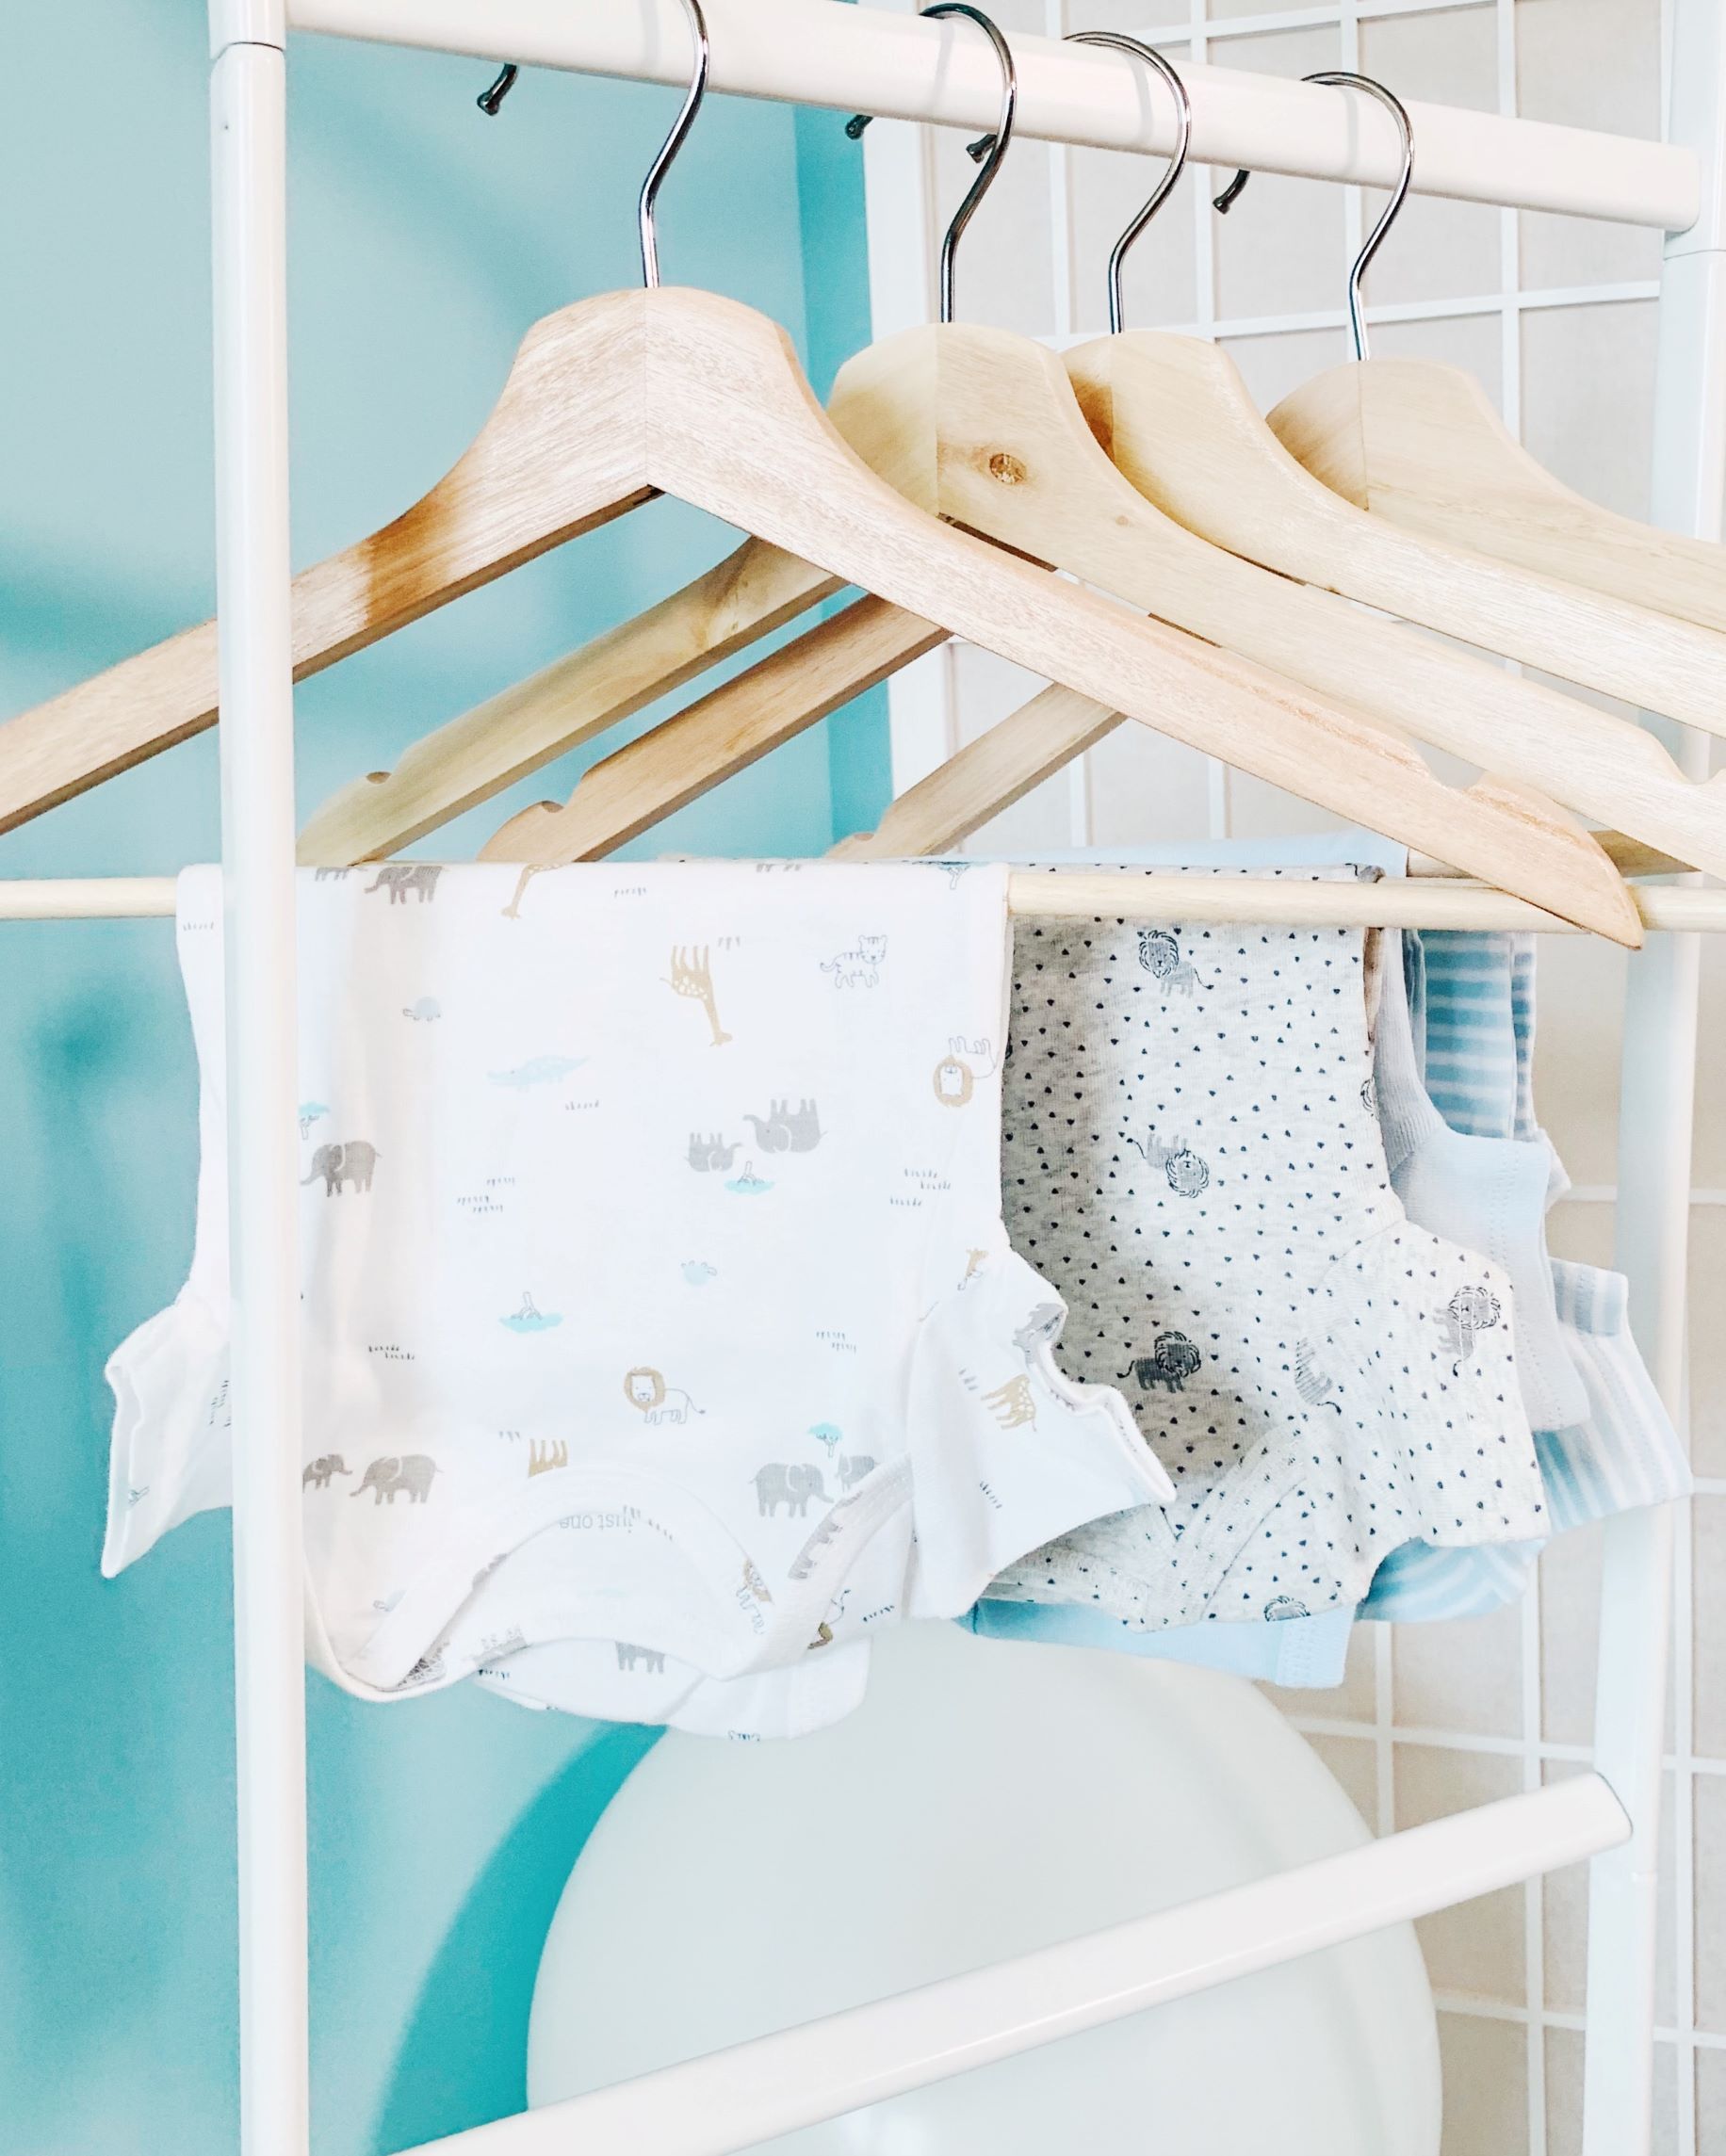 Baby clothes hanging on hangers